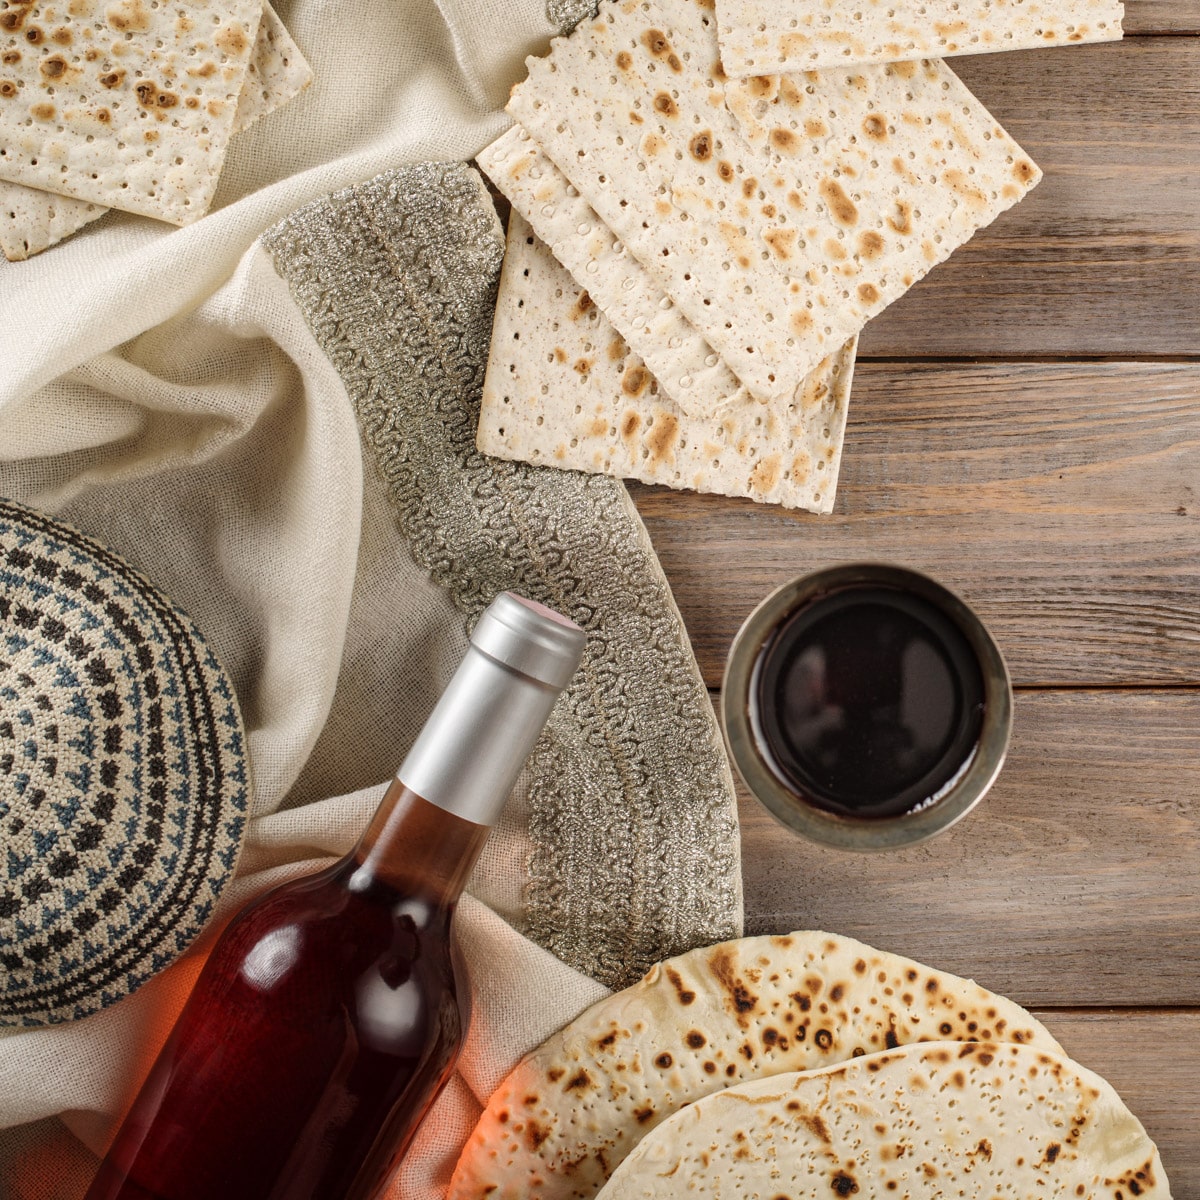 Wine and matza on a wooden table.